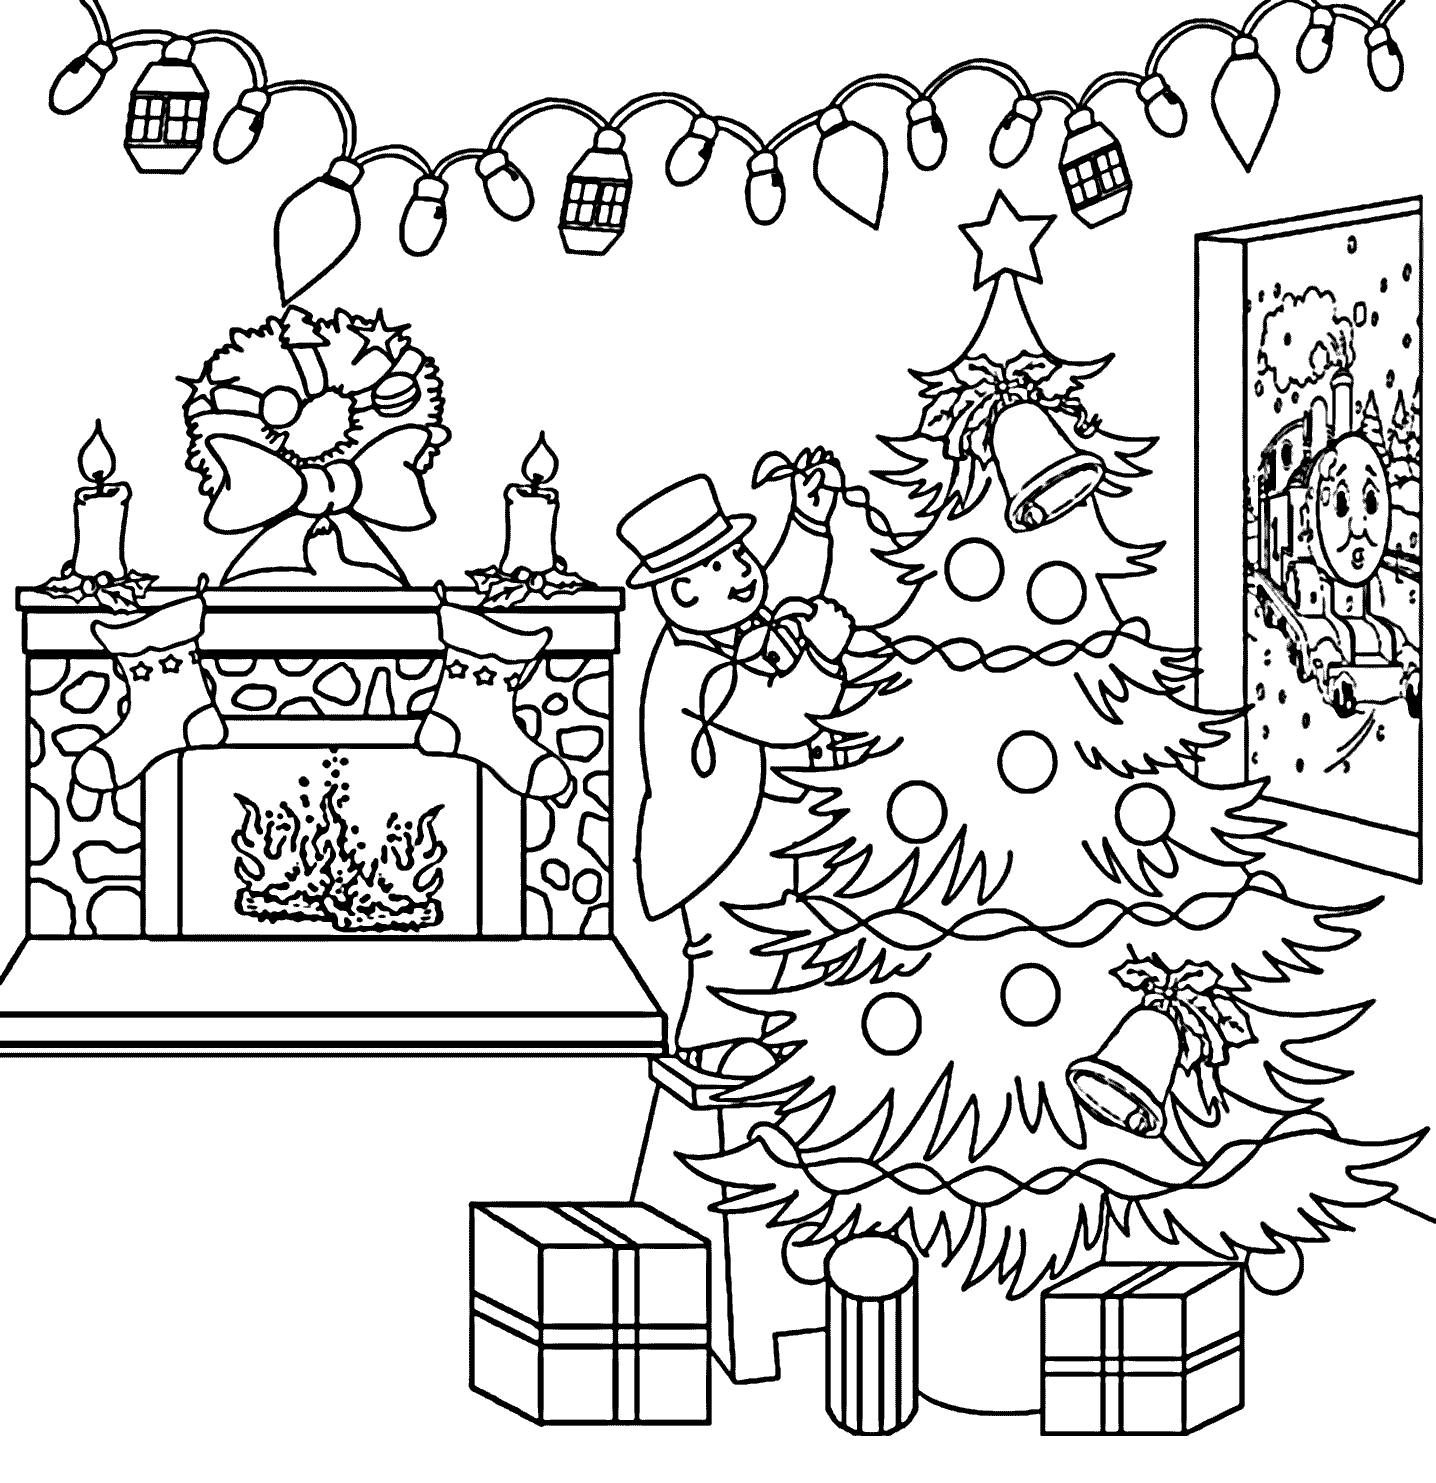 Thomas Train Decorating Christmas Coloring Pages